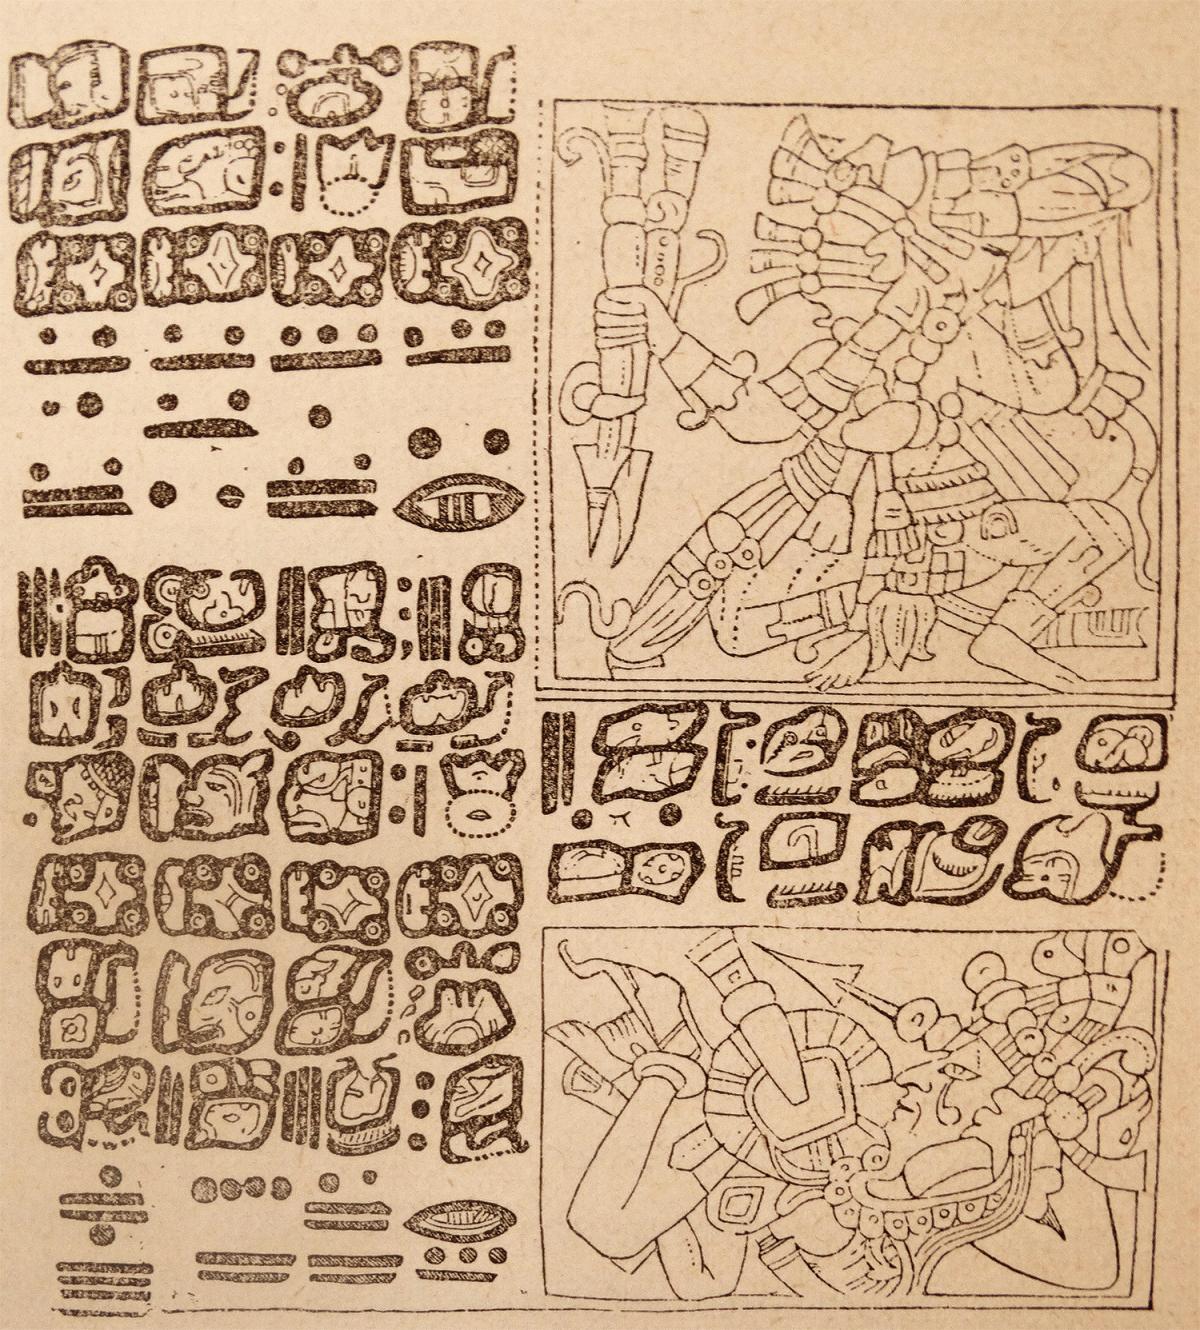 Section of the Dresden Codex which shows gods and demons